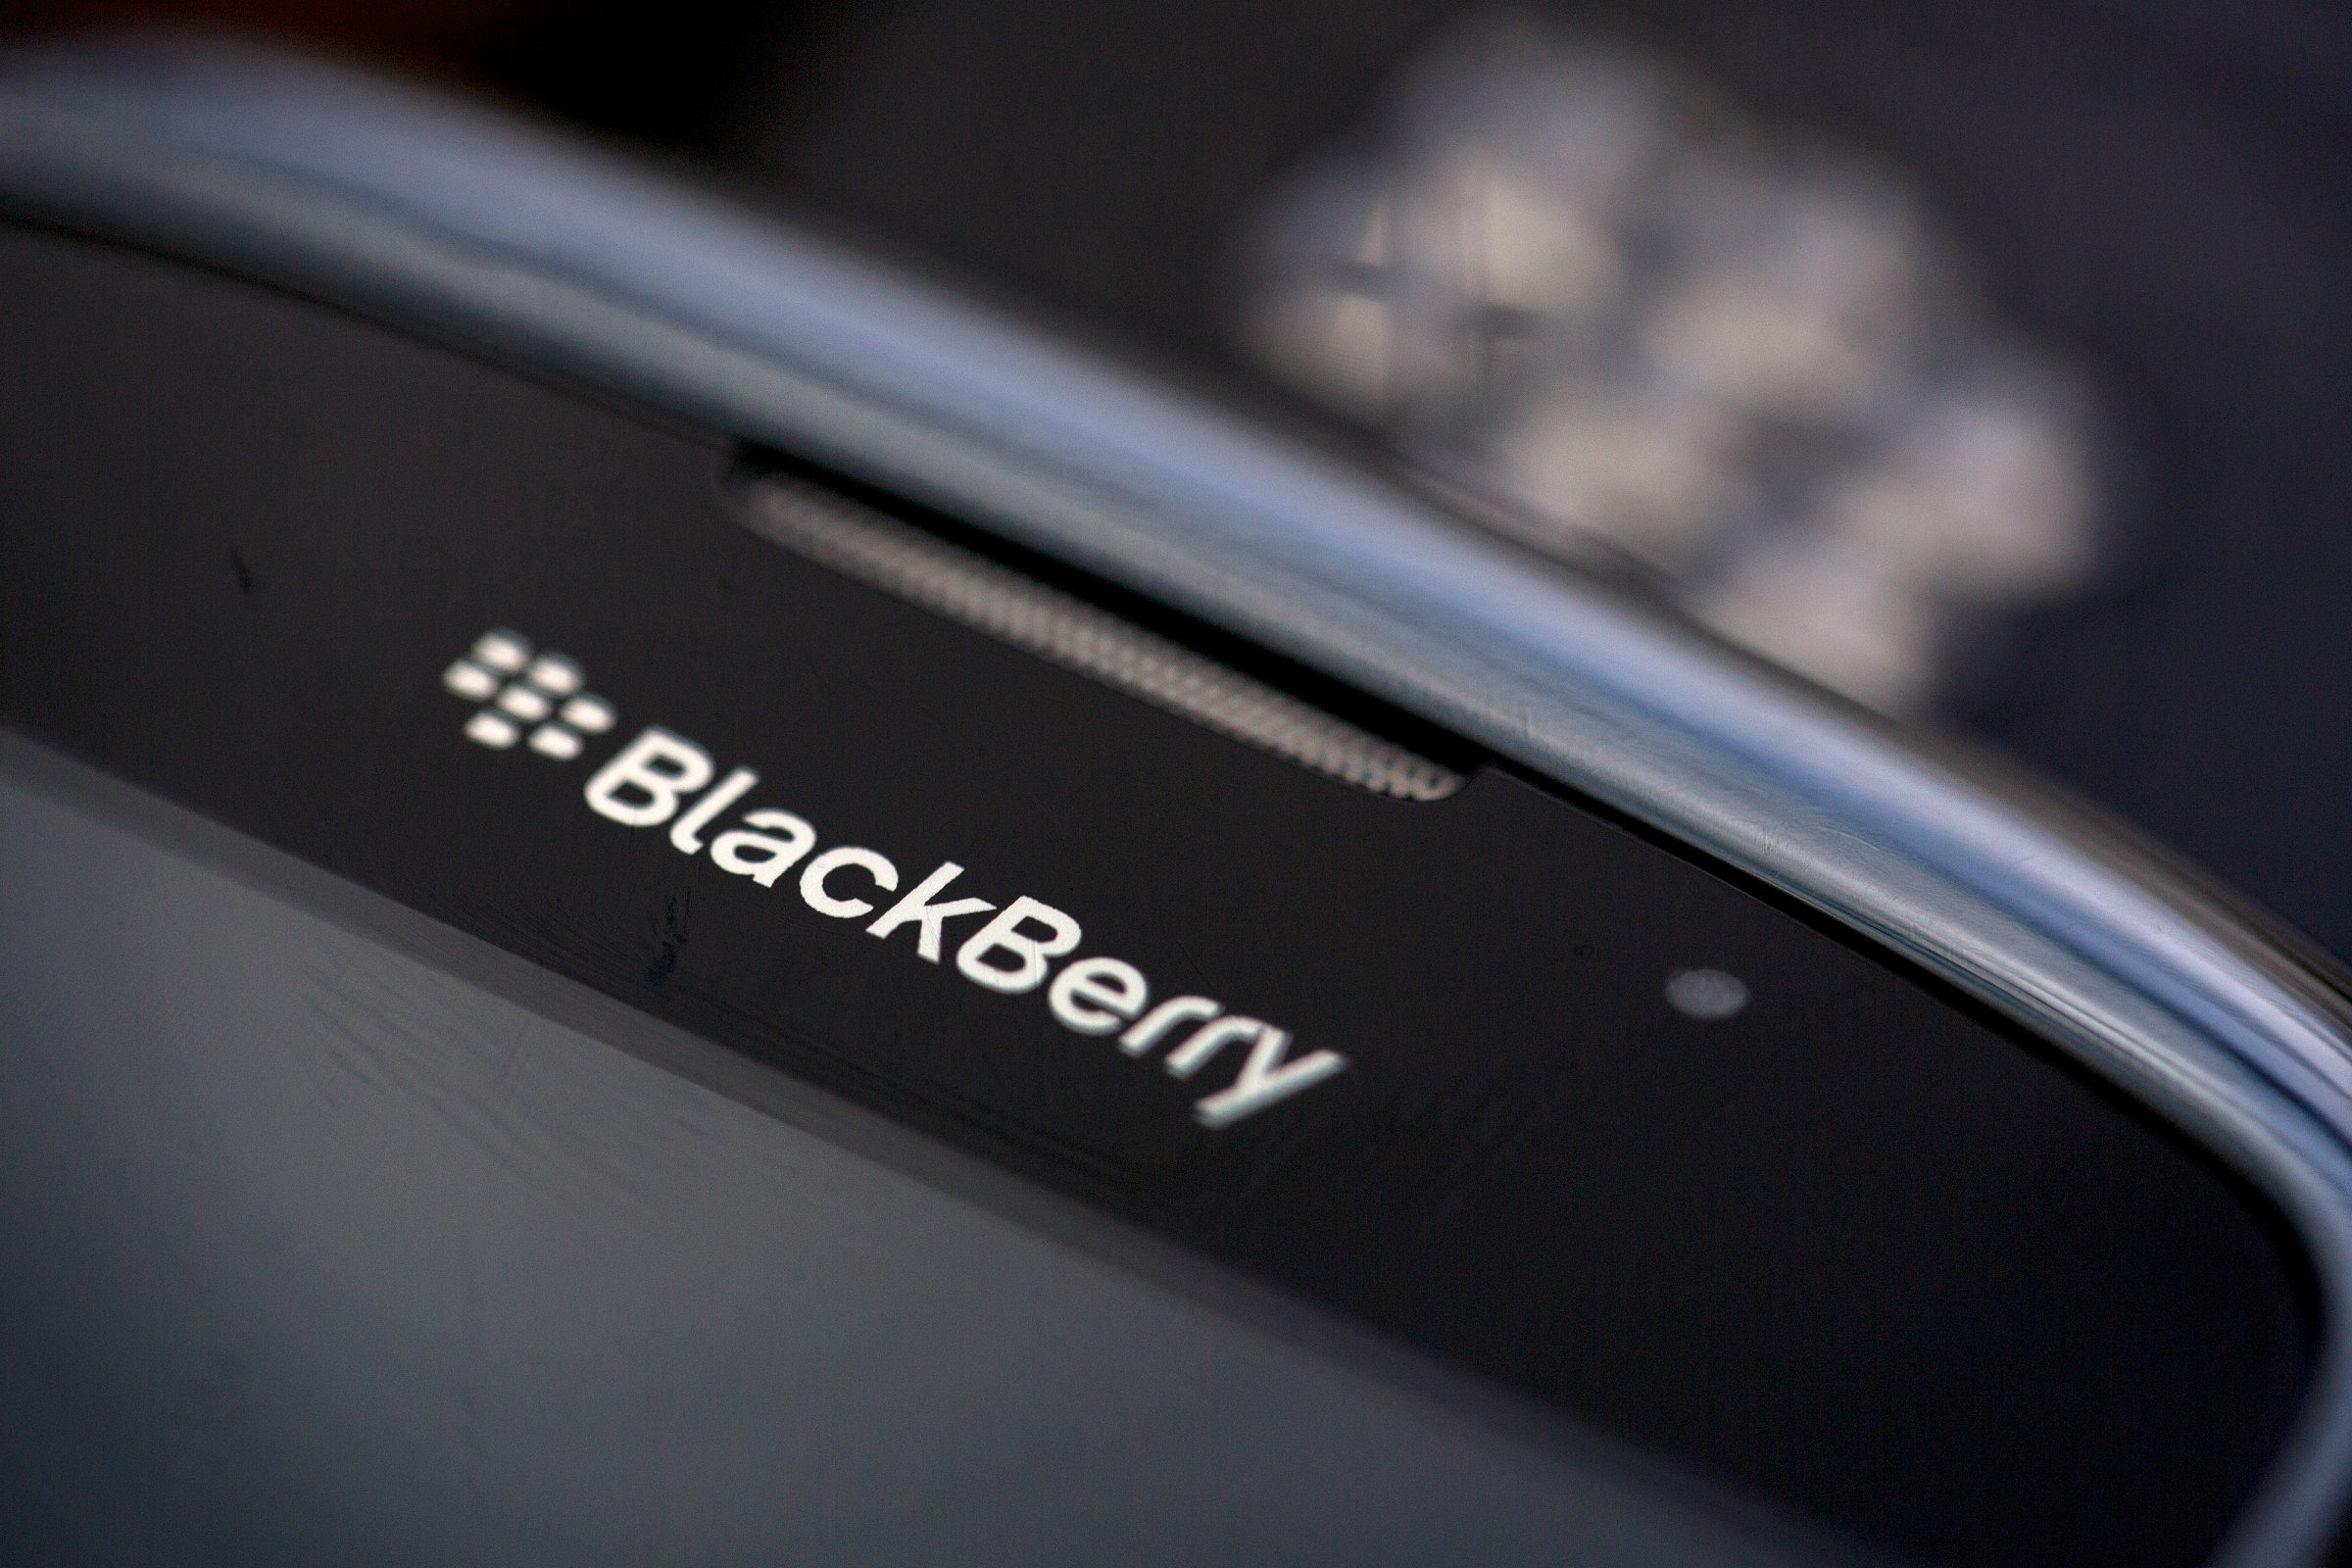 The BlackBerry logo is seen on the screen of a BlackBerry Curve smartphone, produced by BlackBerry Ltd., in this arranged photograph taken in London, U.K., on Monday, Sept. 23, 2013.